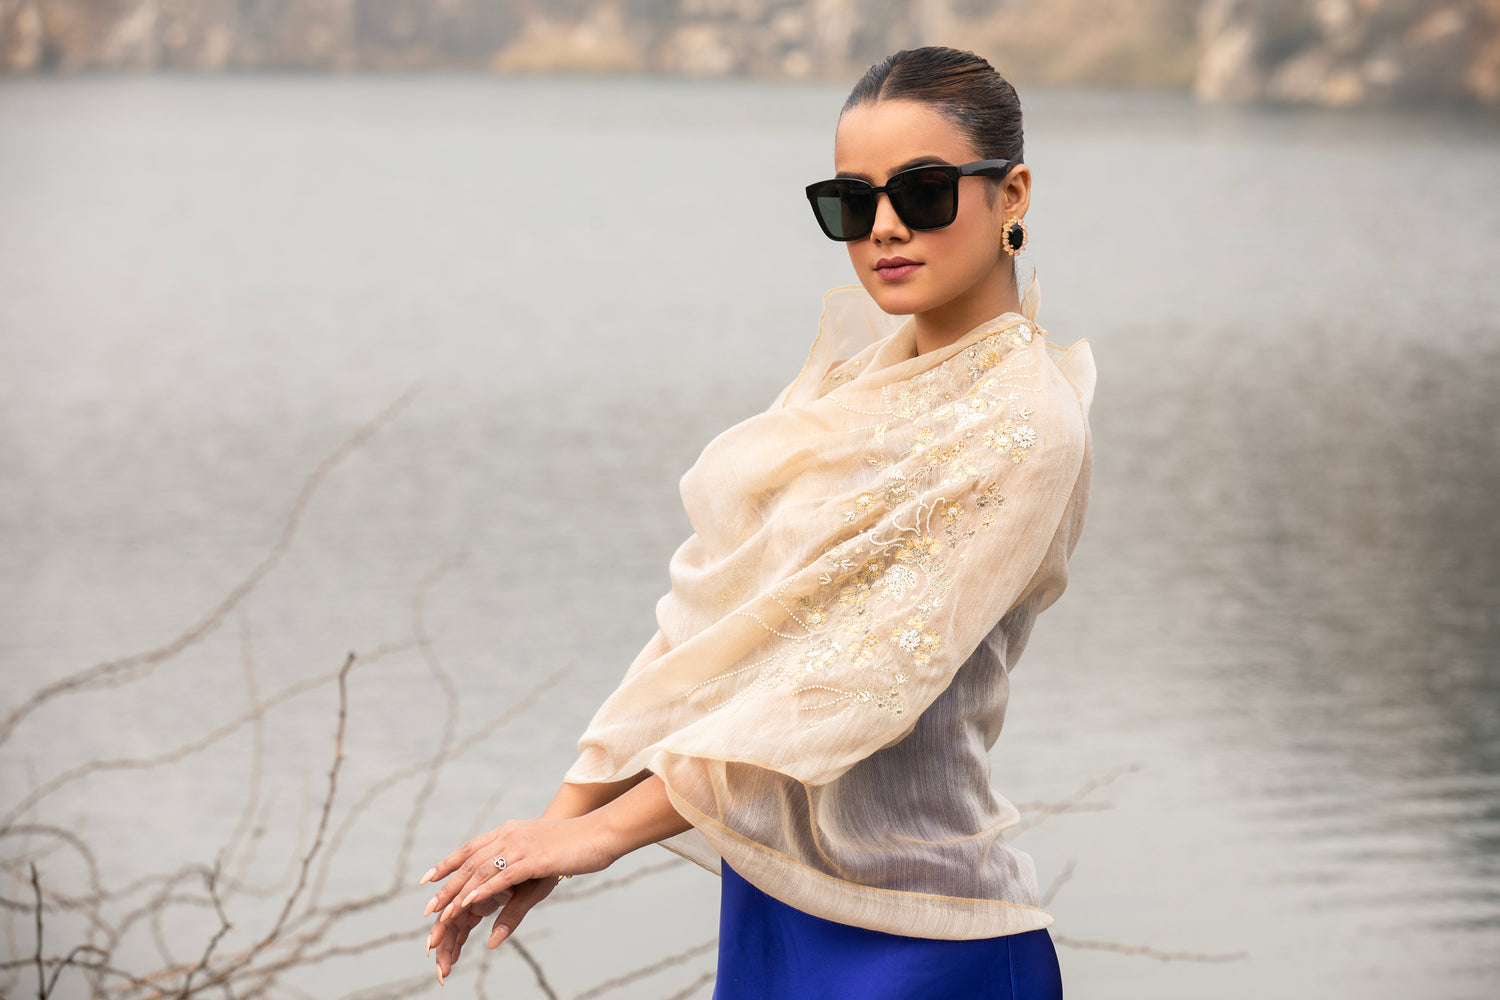 Wrap yourself in luxury with our Modarta Wool Scarf, a chic beige stole designed for women. Crafted with the finest wool, it's the epitome of elegance and warmth.